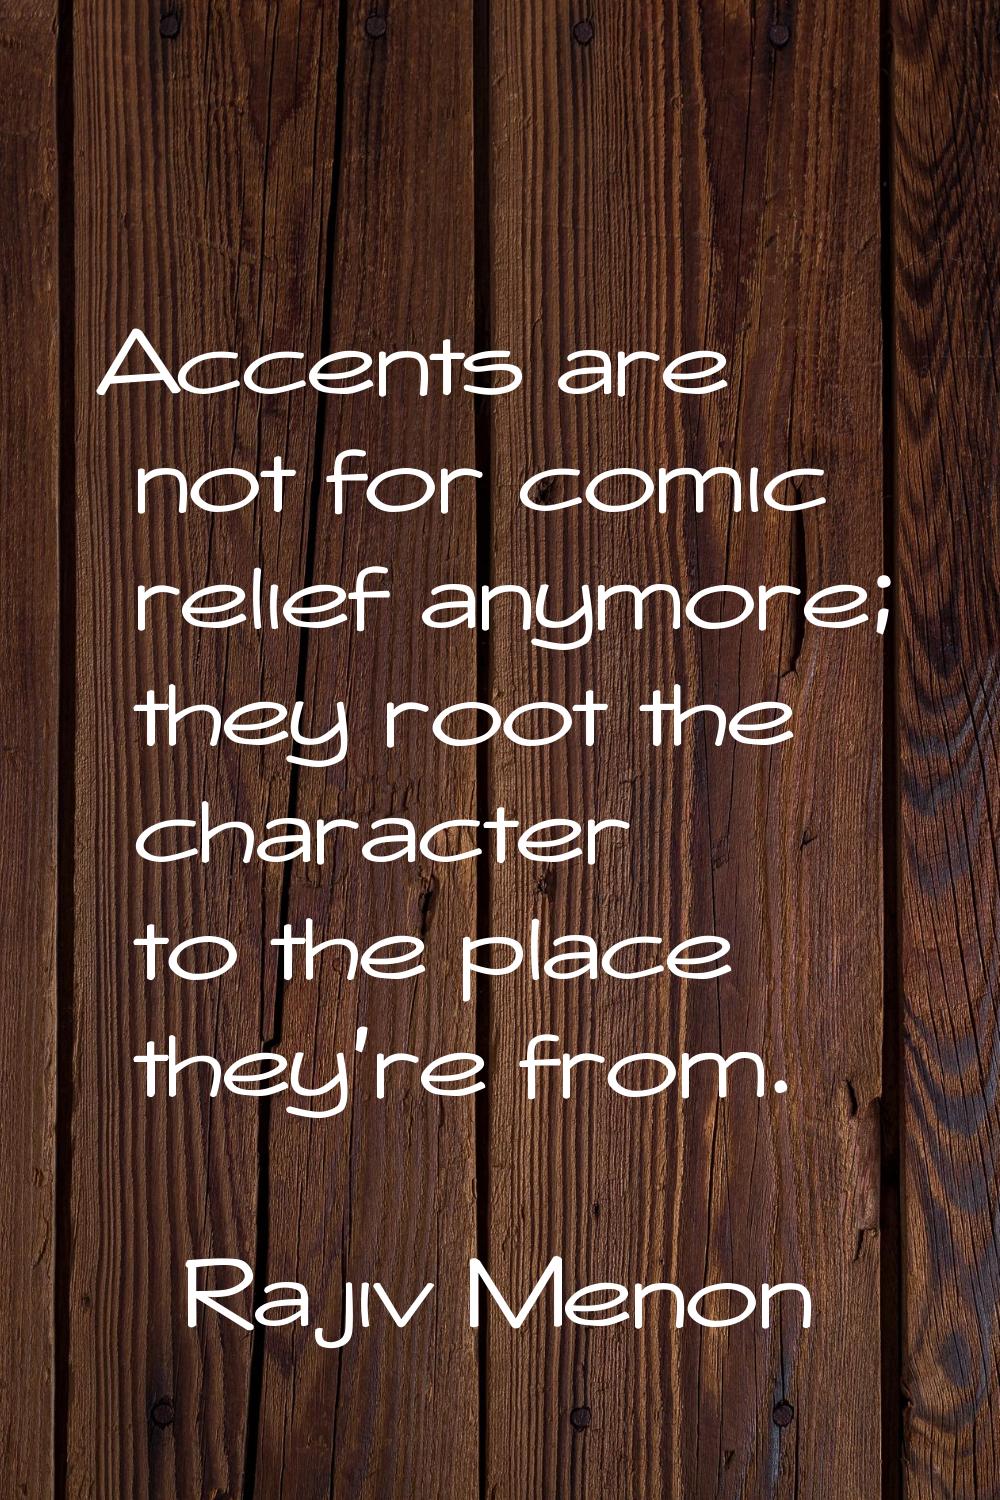 Accents are not for comic relief anymore; they root the character to the place they're from.